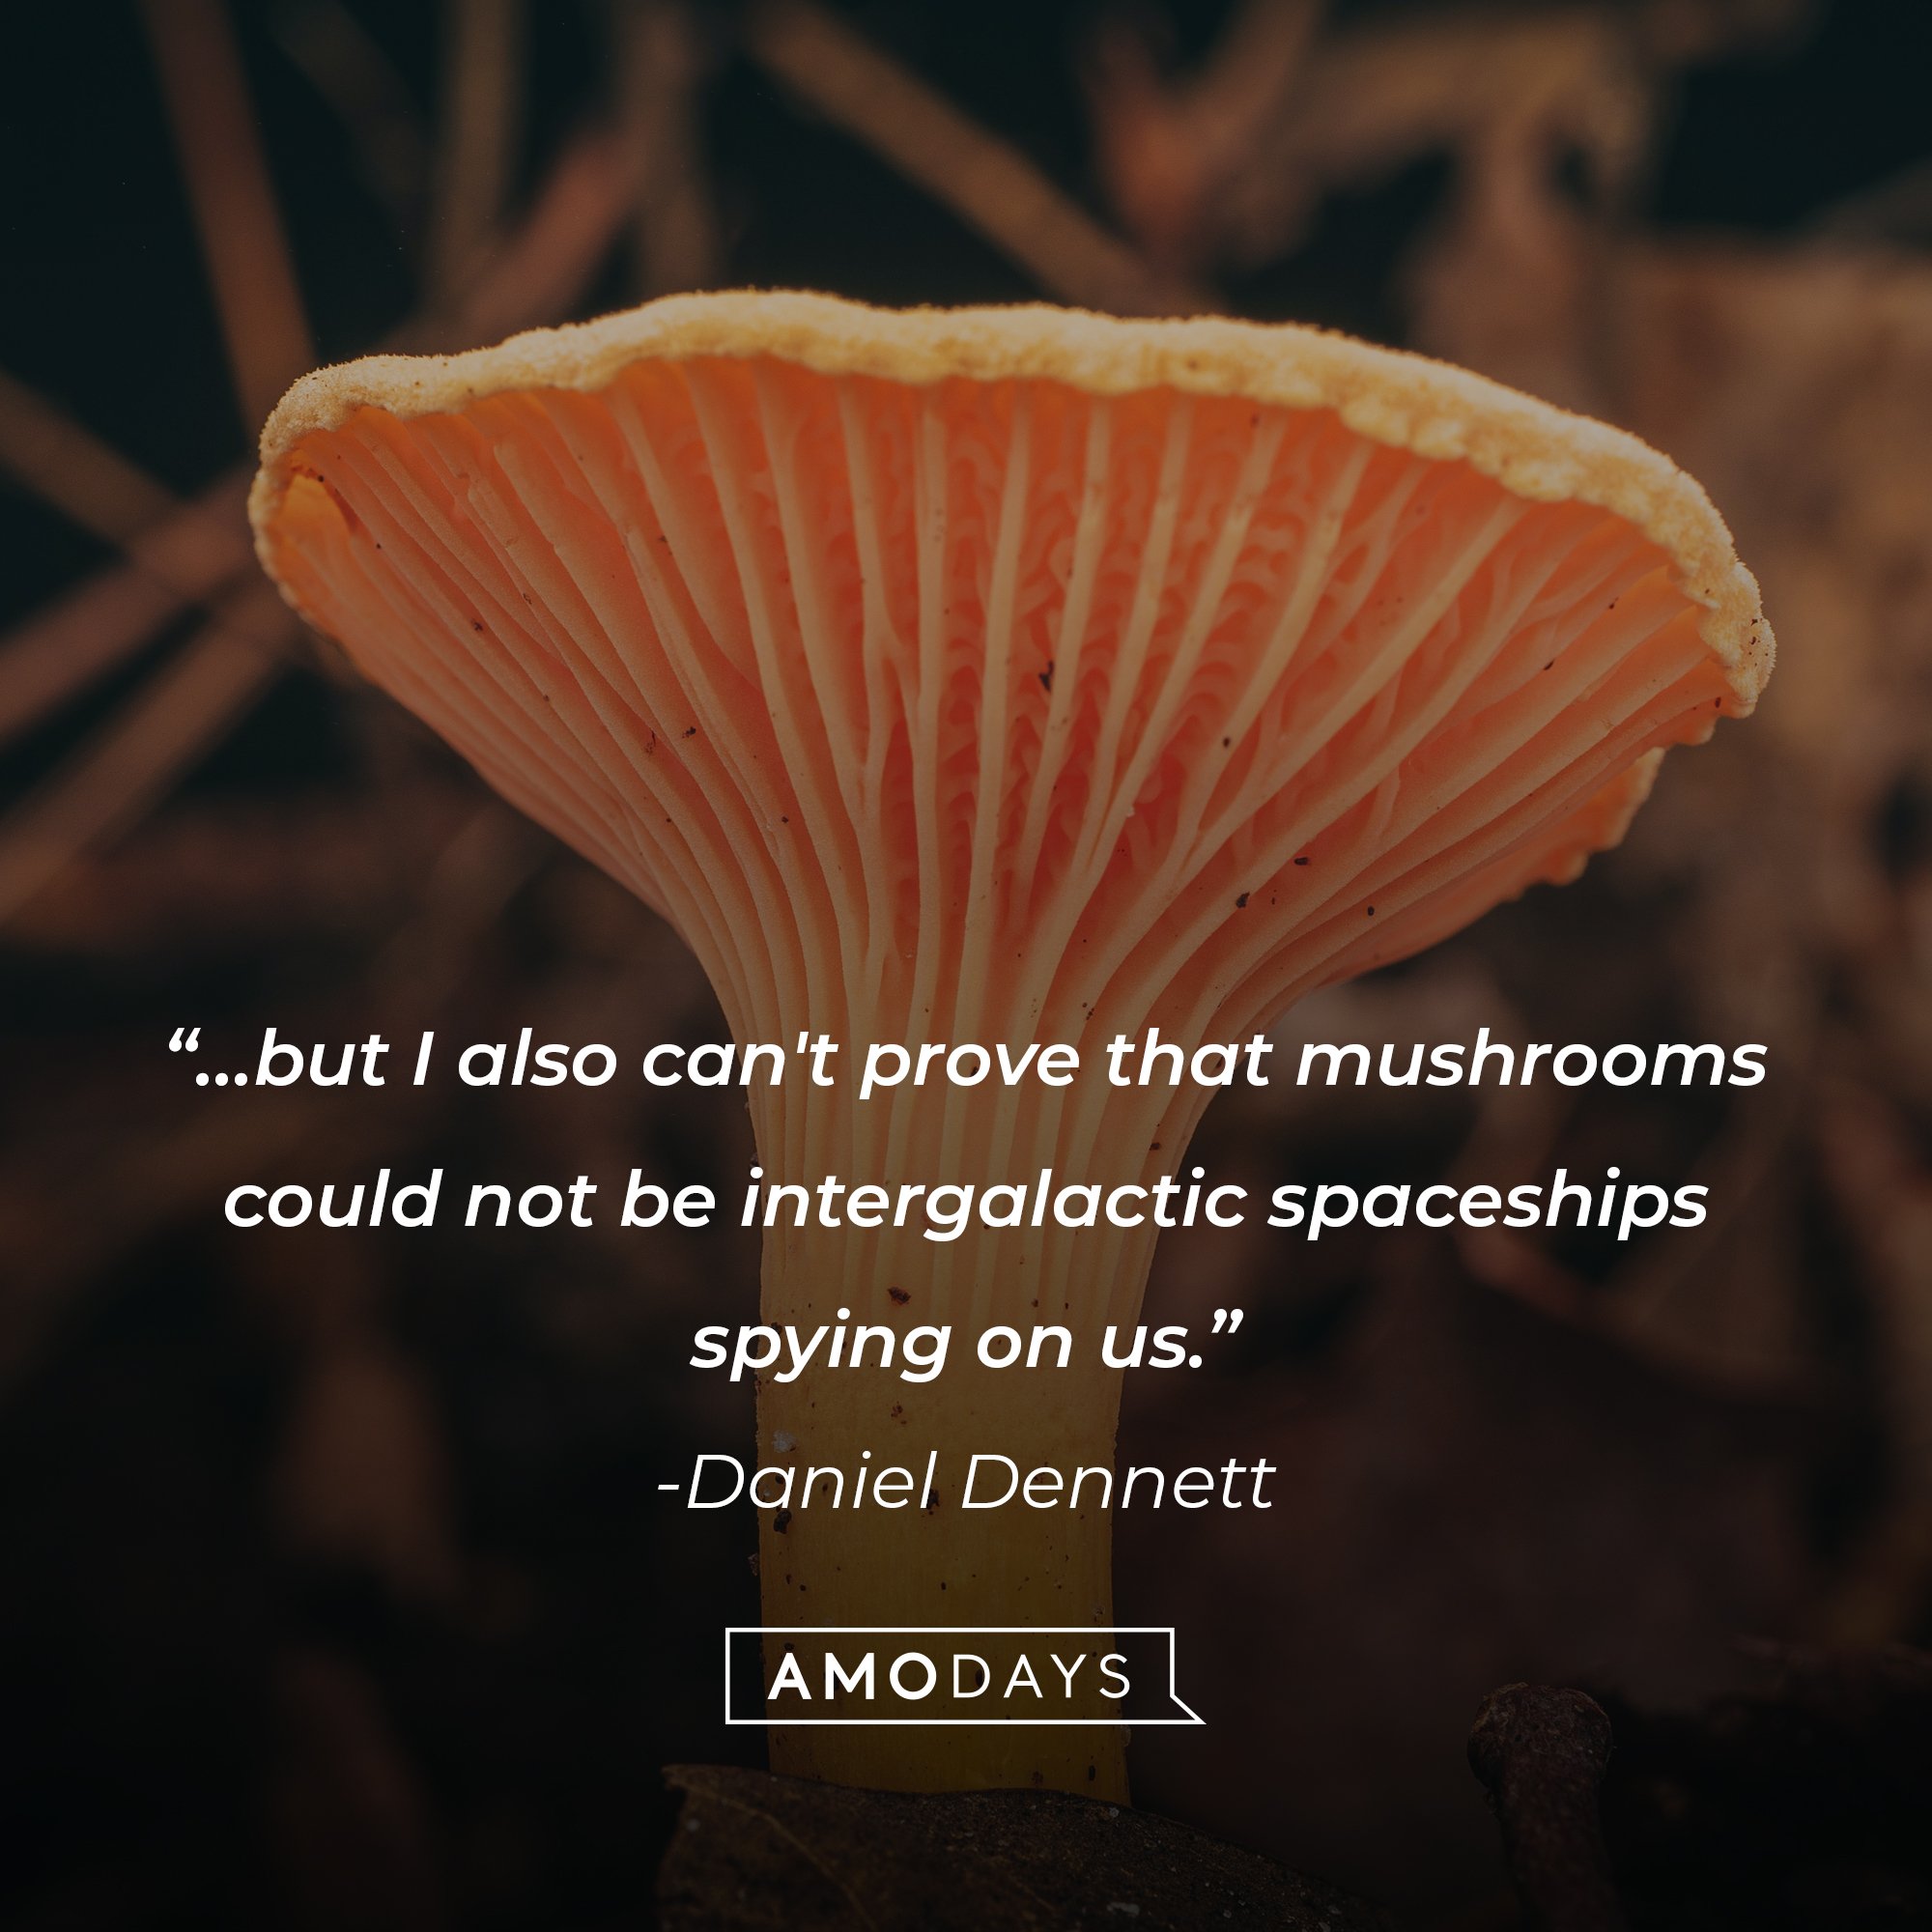 Daniel Dennett’s quote: "…but I also can't prove that mushrooms could not be intergalactic spaceships spying on us.” | Image: AmoDays